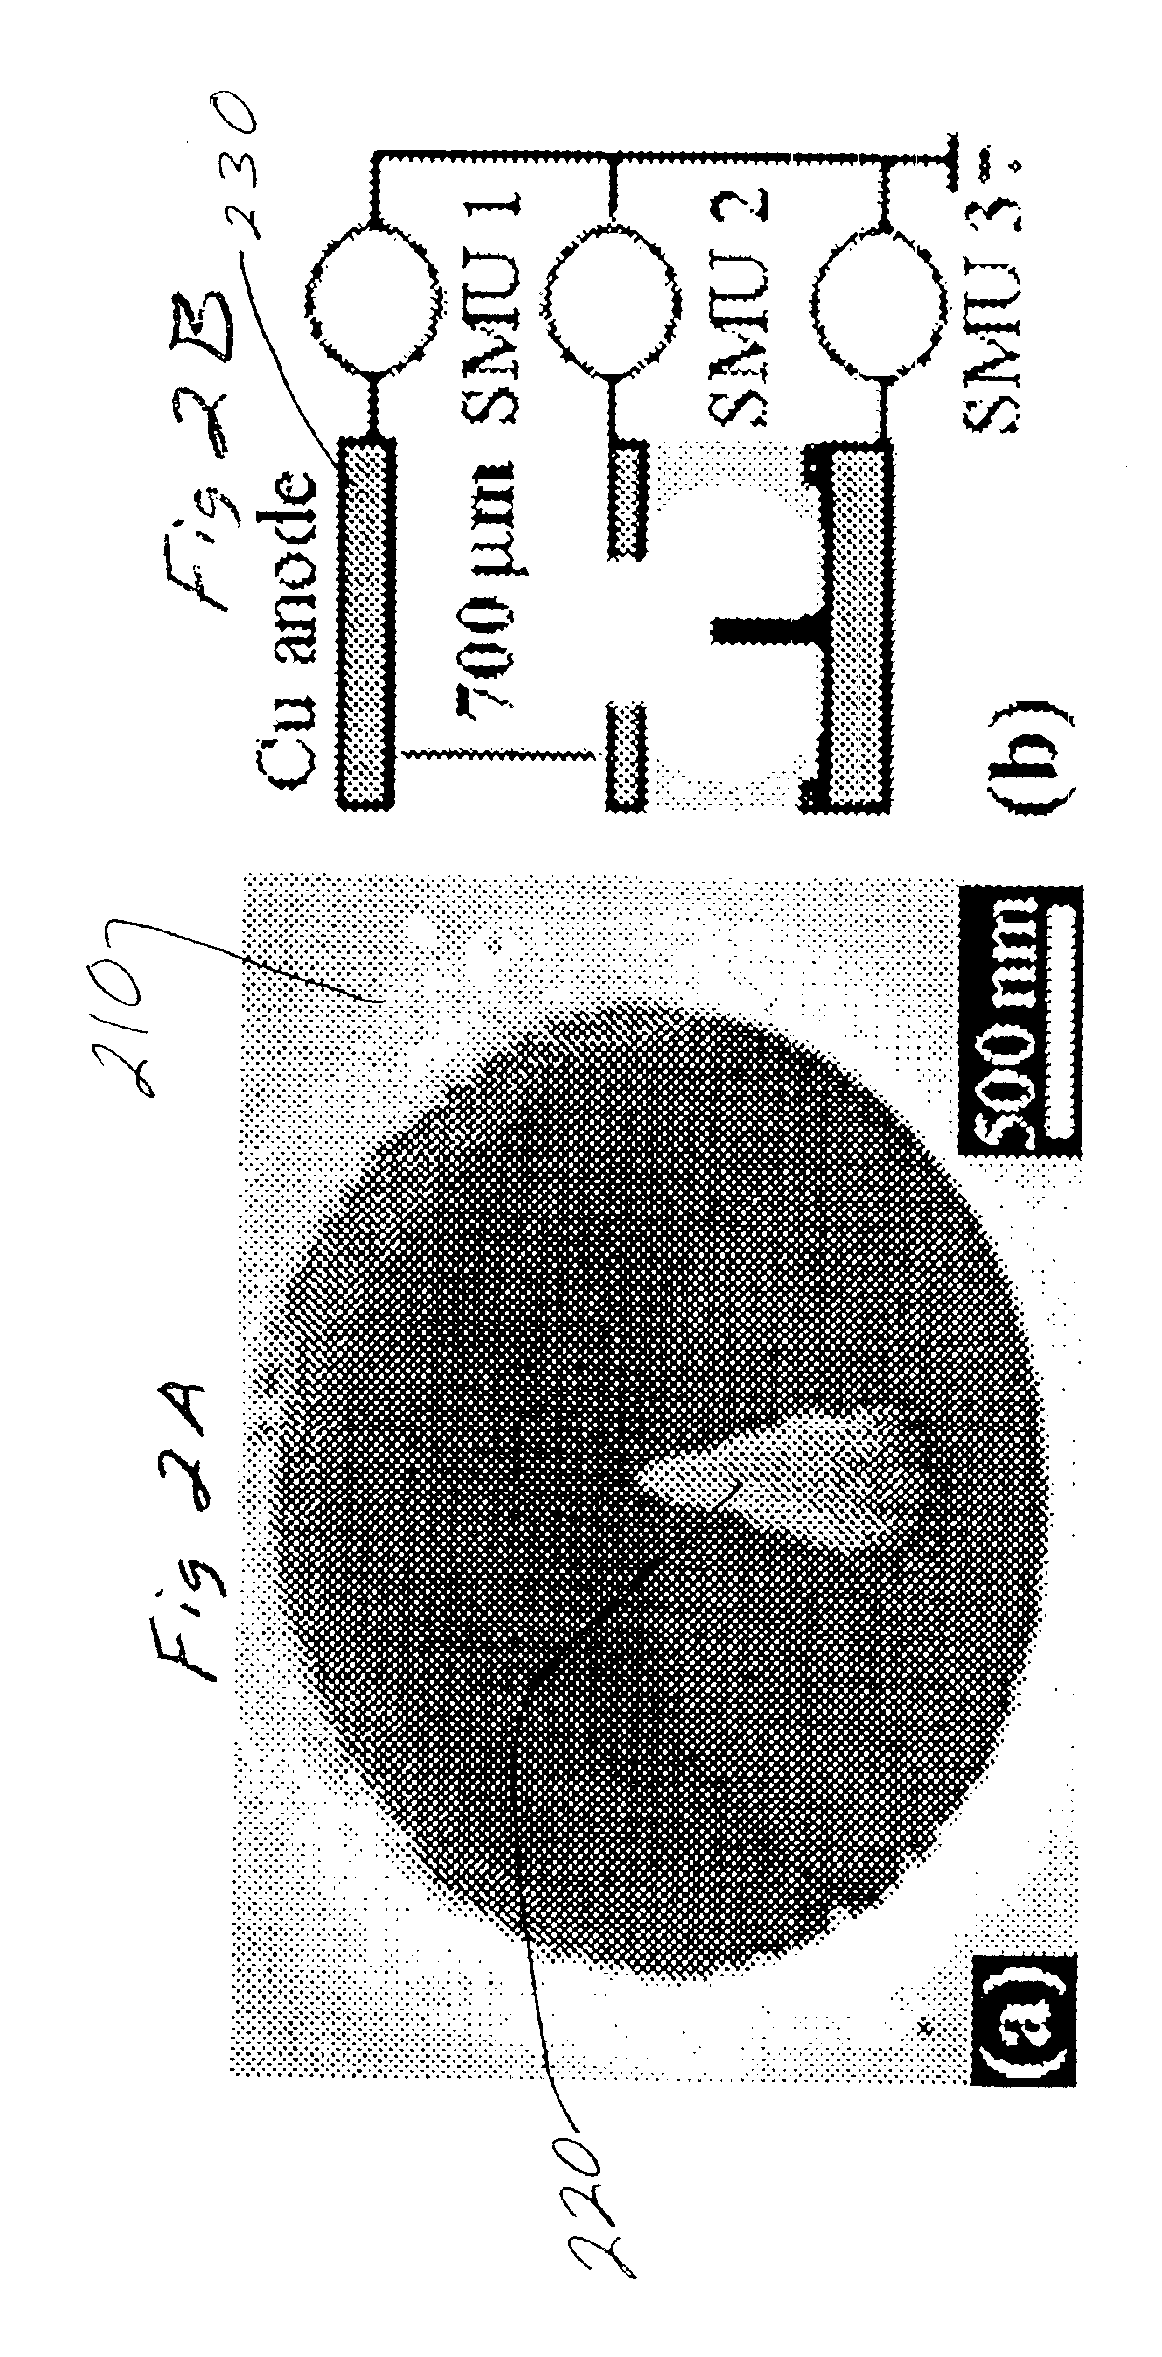 Gated fabrication of nanostructure field emission cathode material within a device